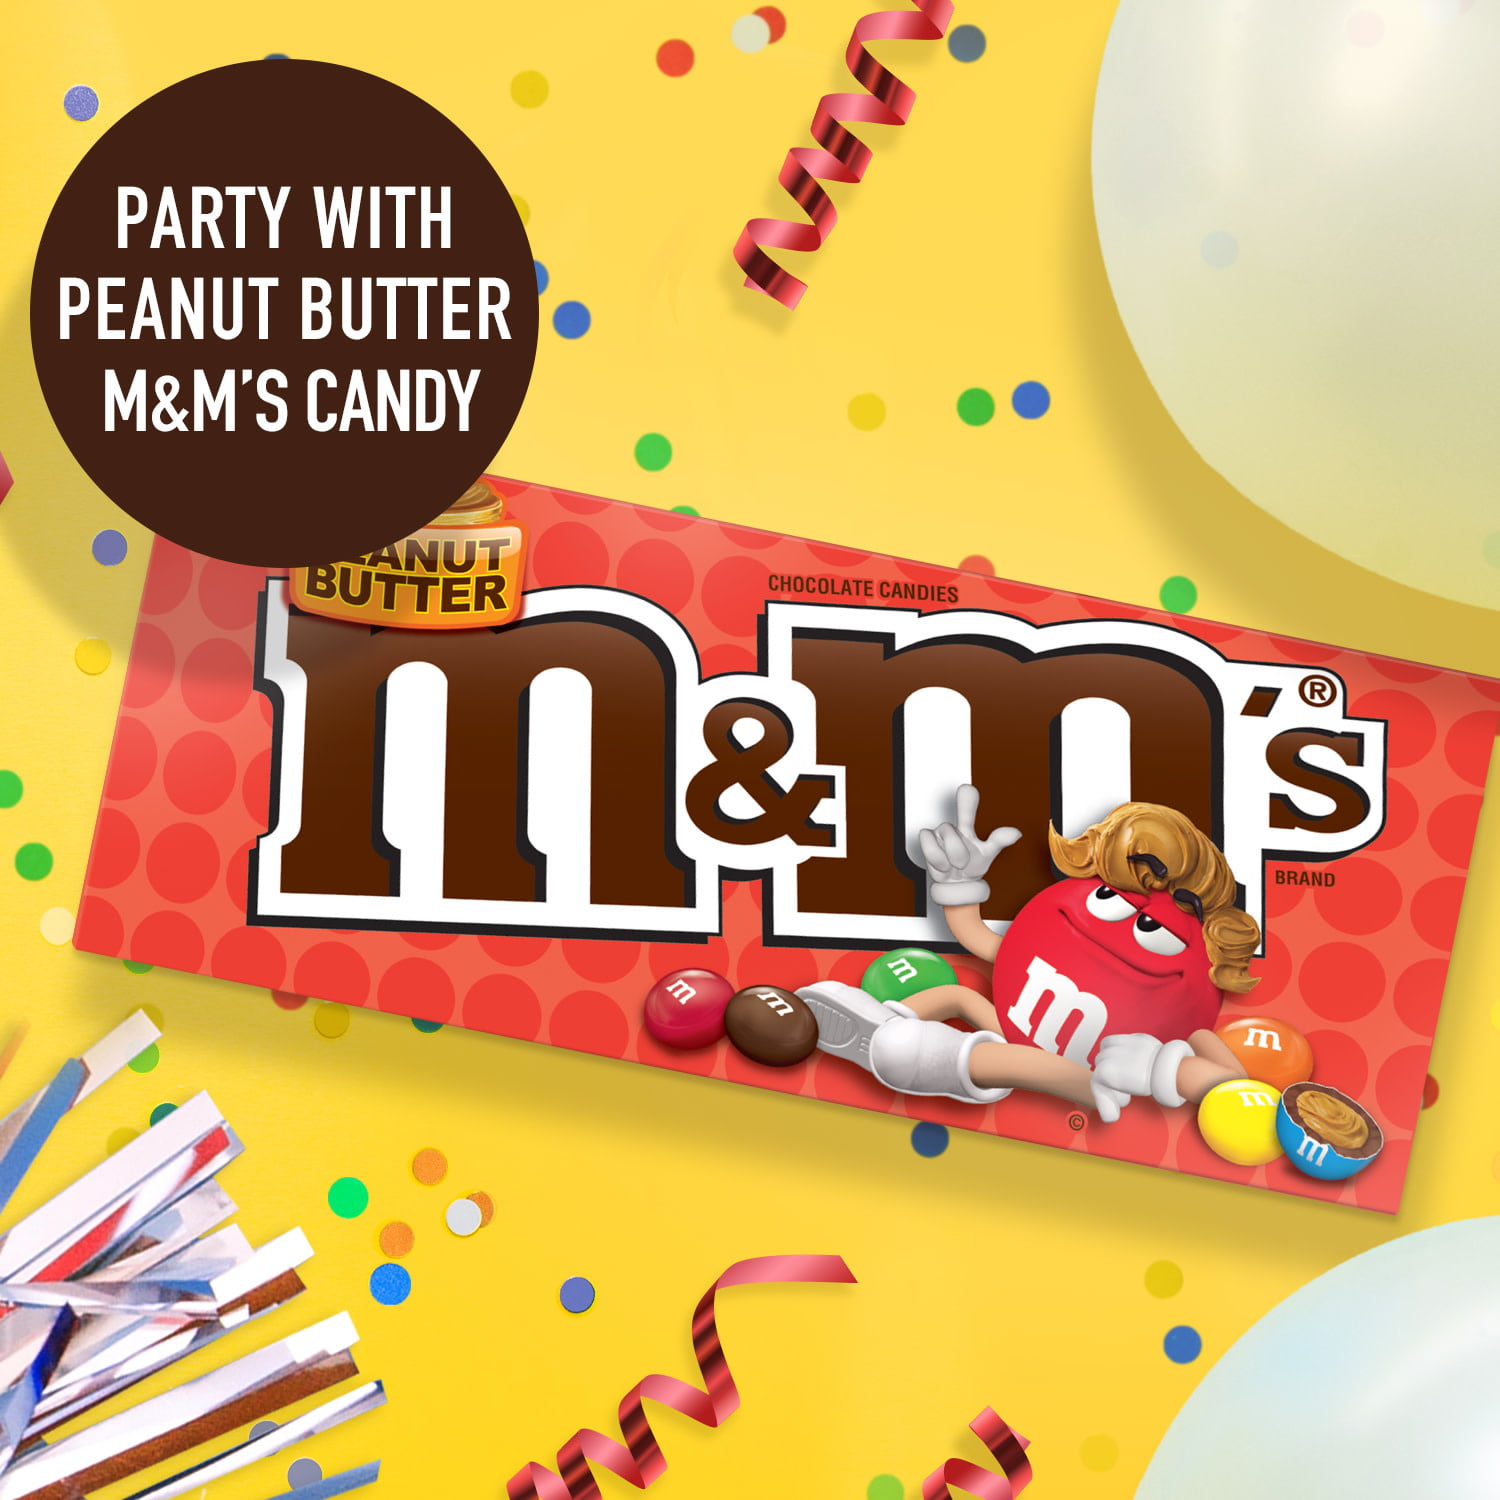 M&M's Peanut Butter Exists And You Can Get Your Hands On Some In B&M Stores